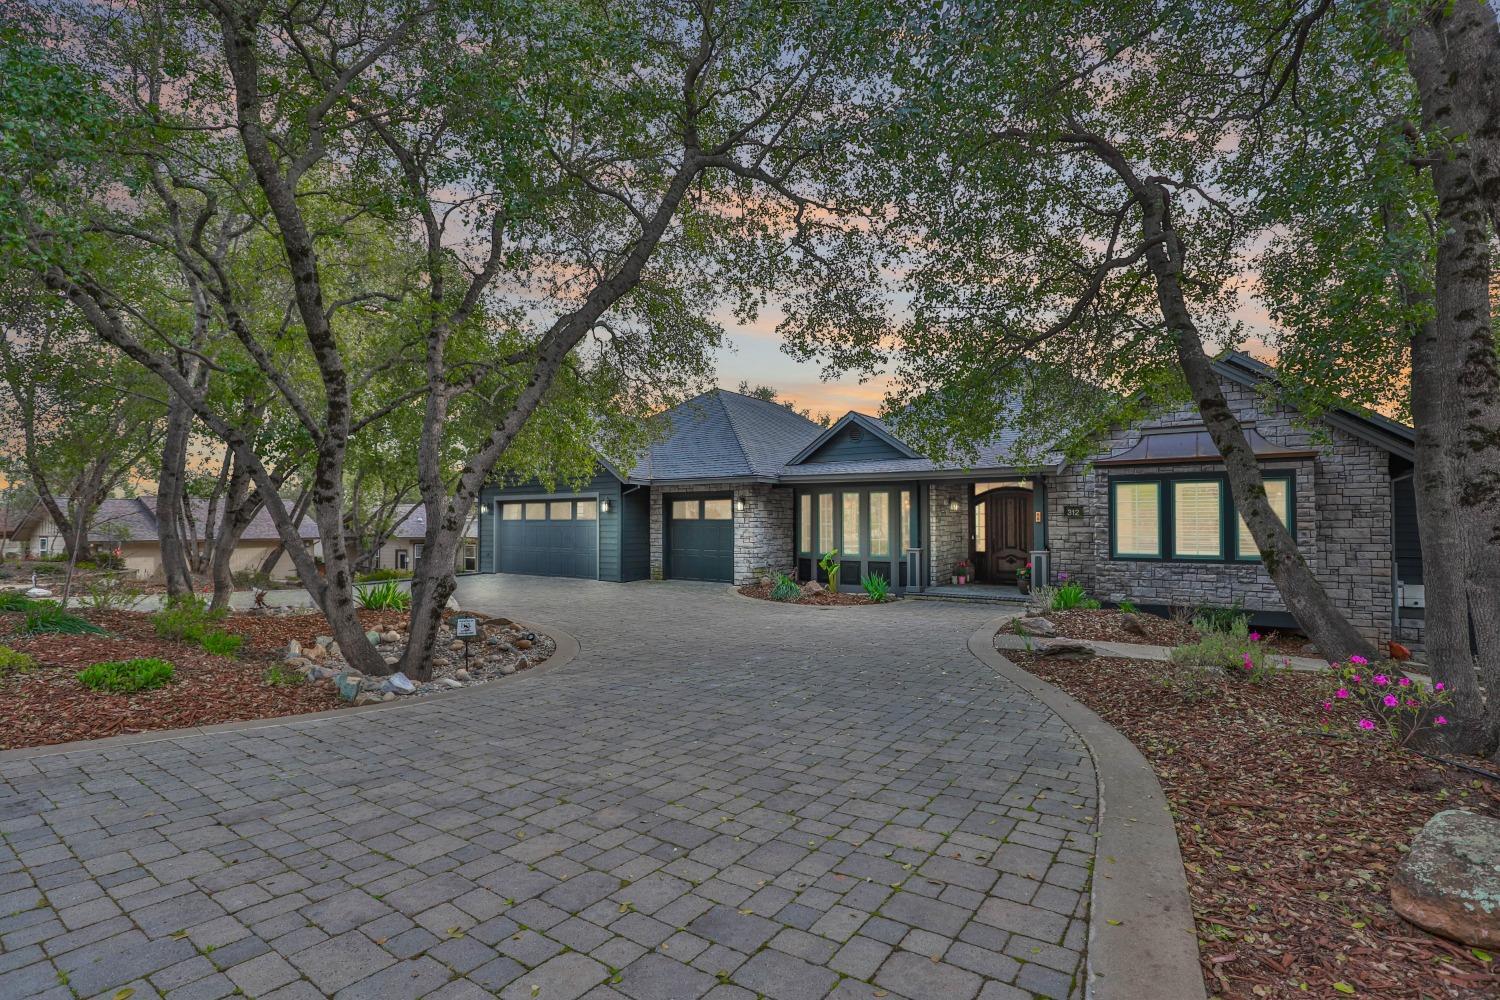 Photo of 312 Catalpa Ln in Angels Camp, CA